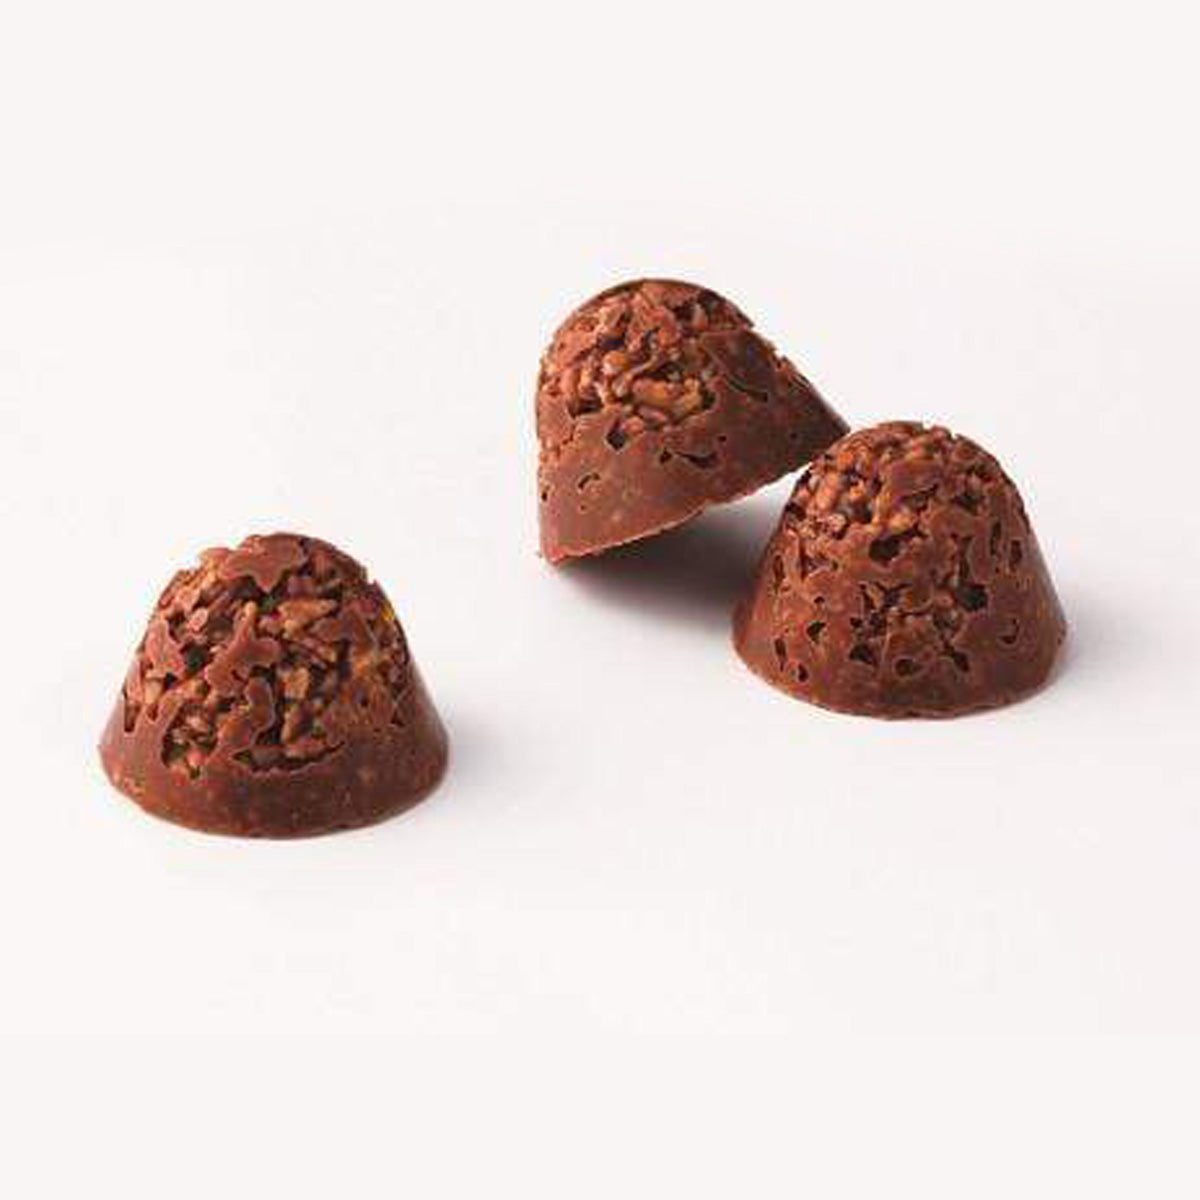 ROYCE' Chocolate - Potechi Crunch Chocolate - Image shows brown chocolate creations. Background is in white color.